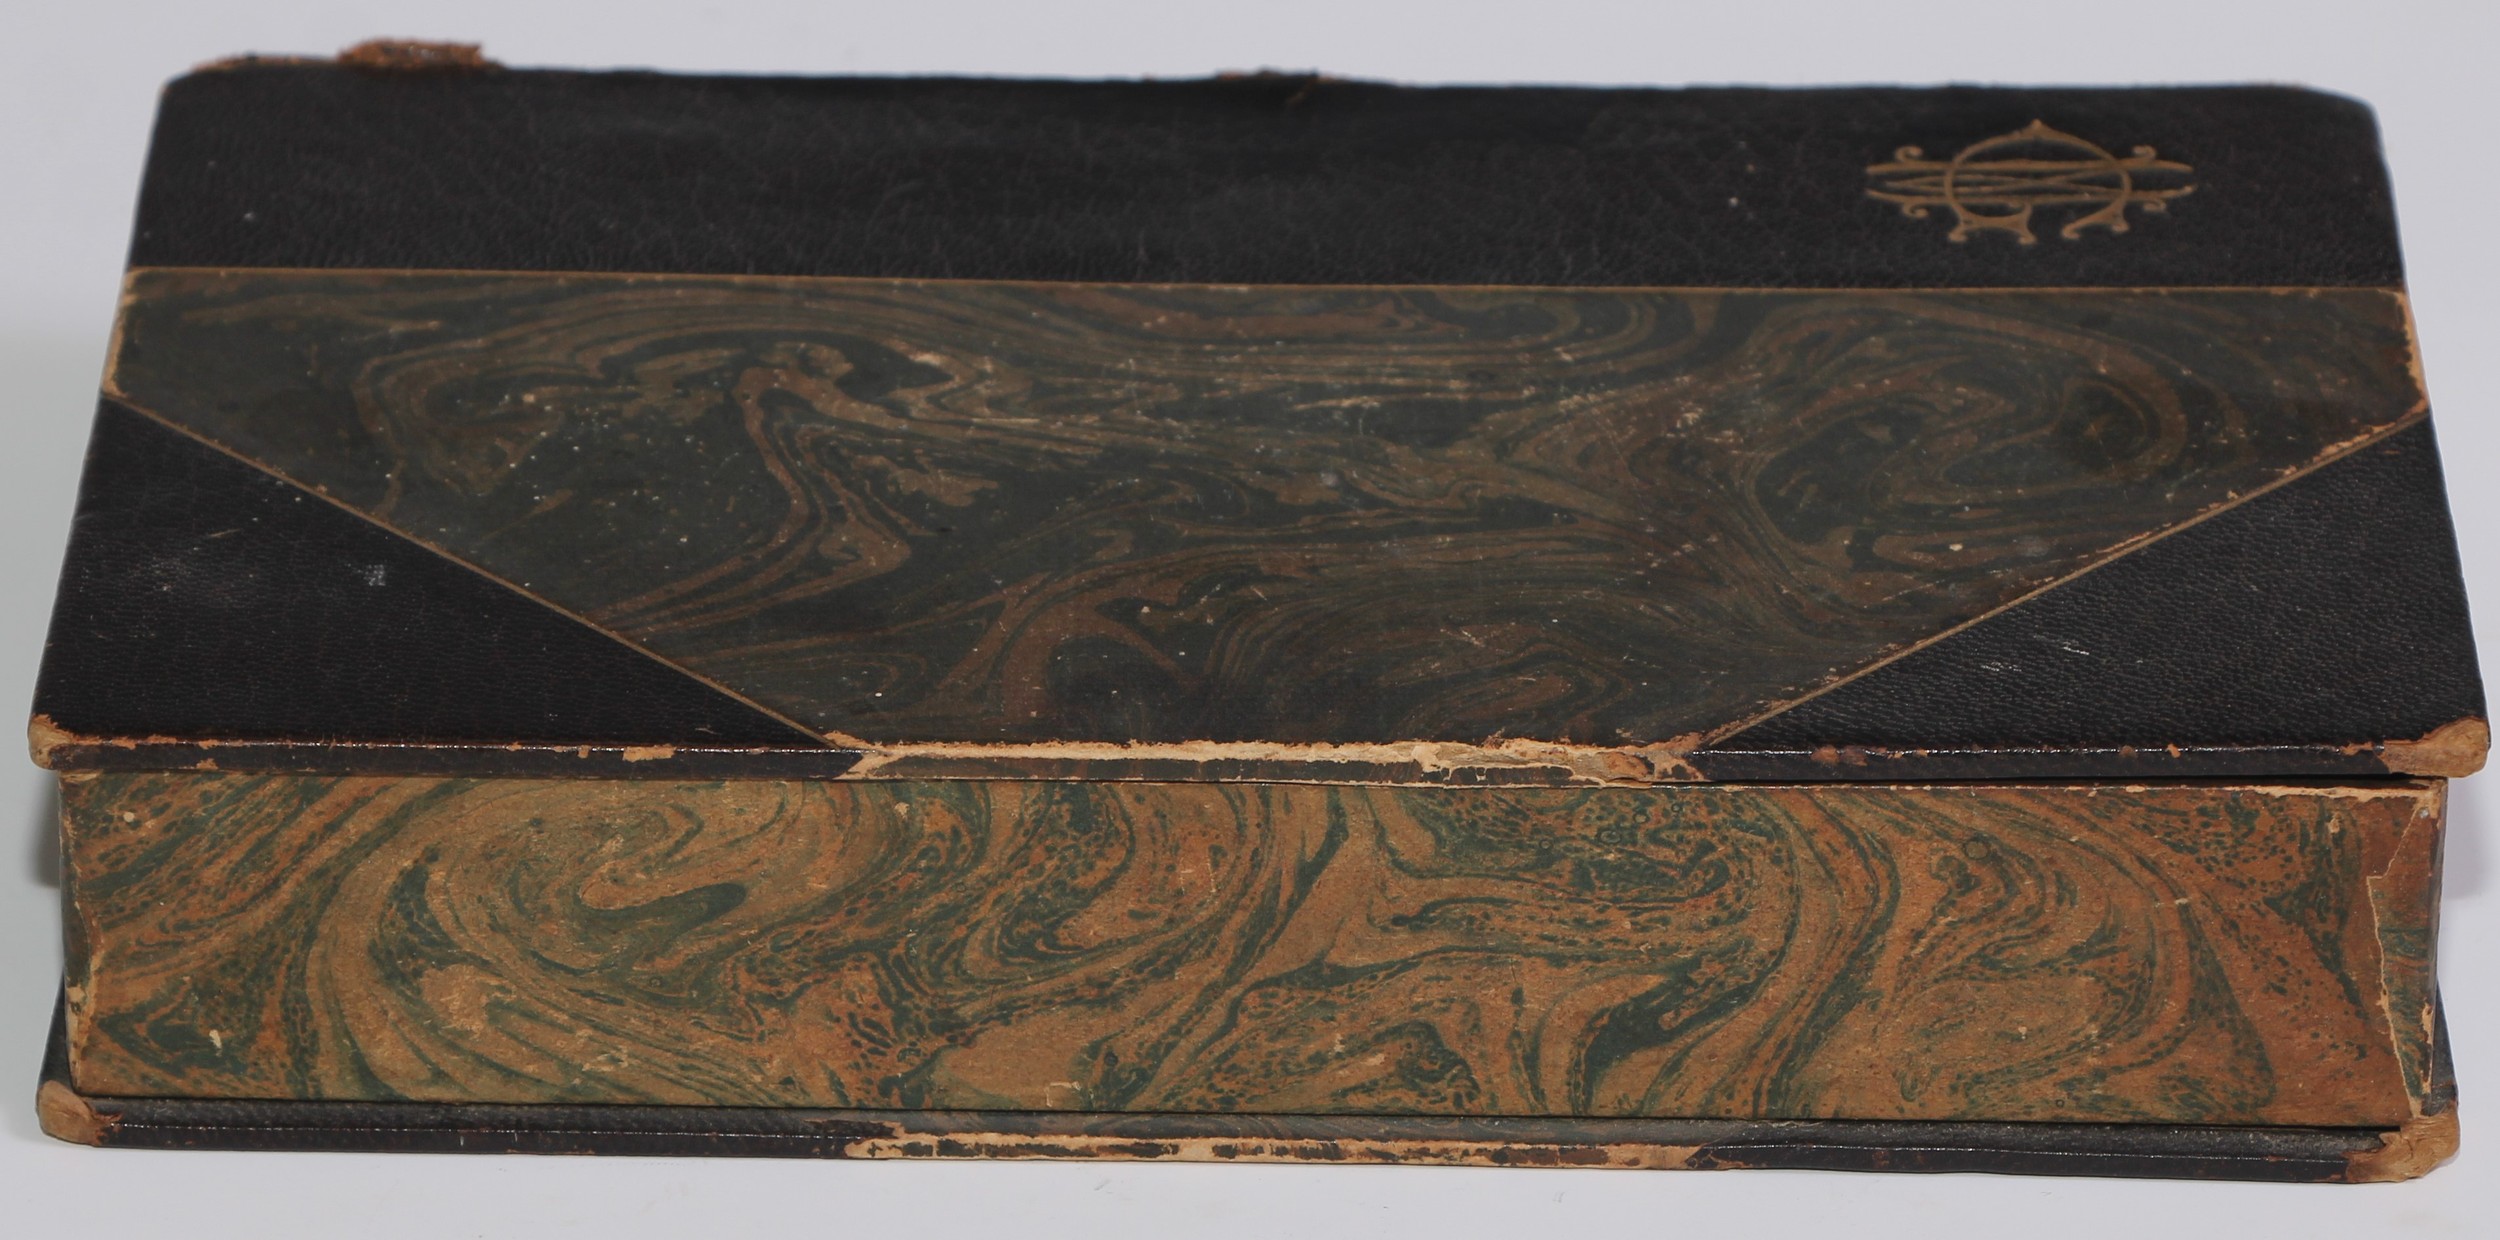 An early 20th century disguise volume dummy book box, as an edition of Guy de Maupassant Bel-Ami, - Image 2 of 3